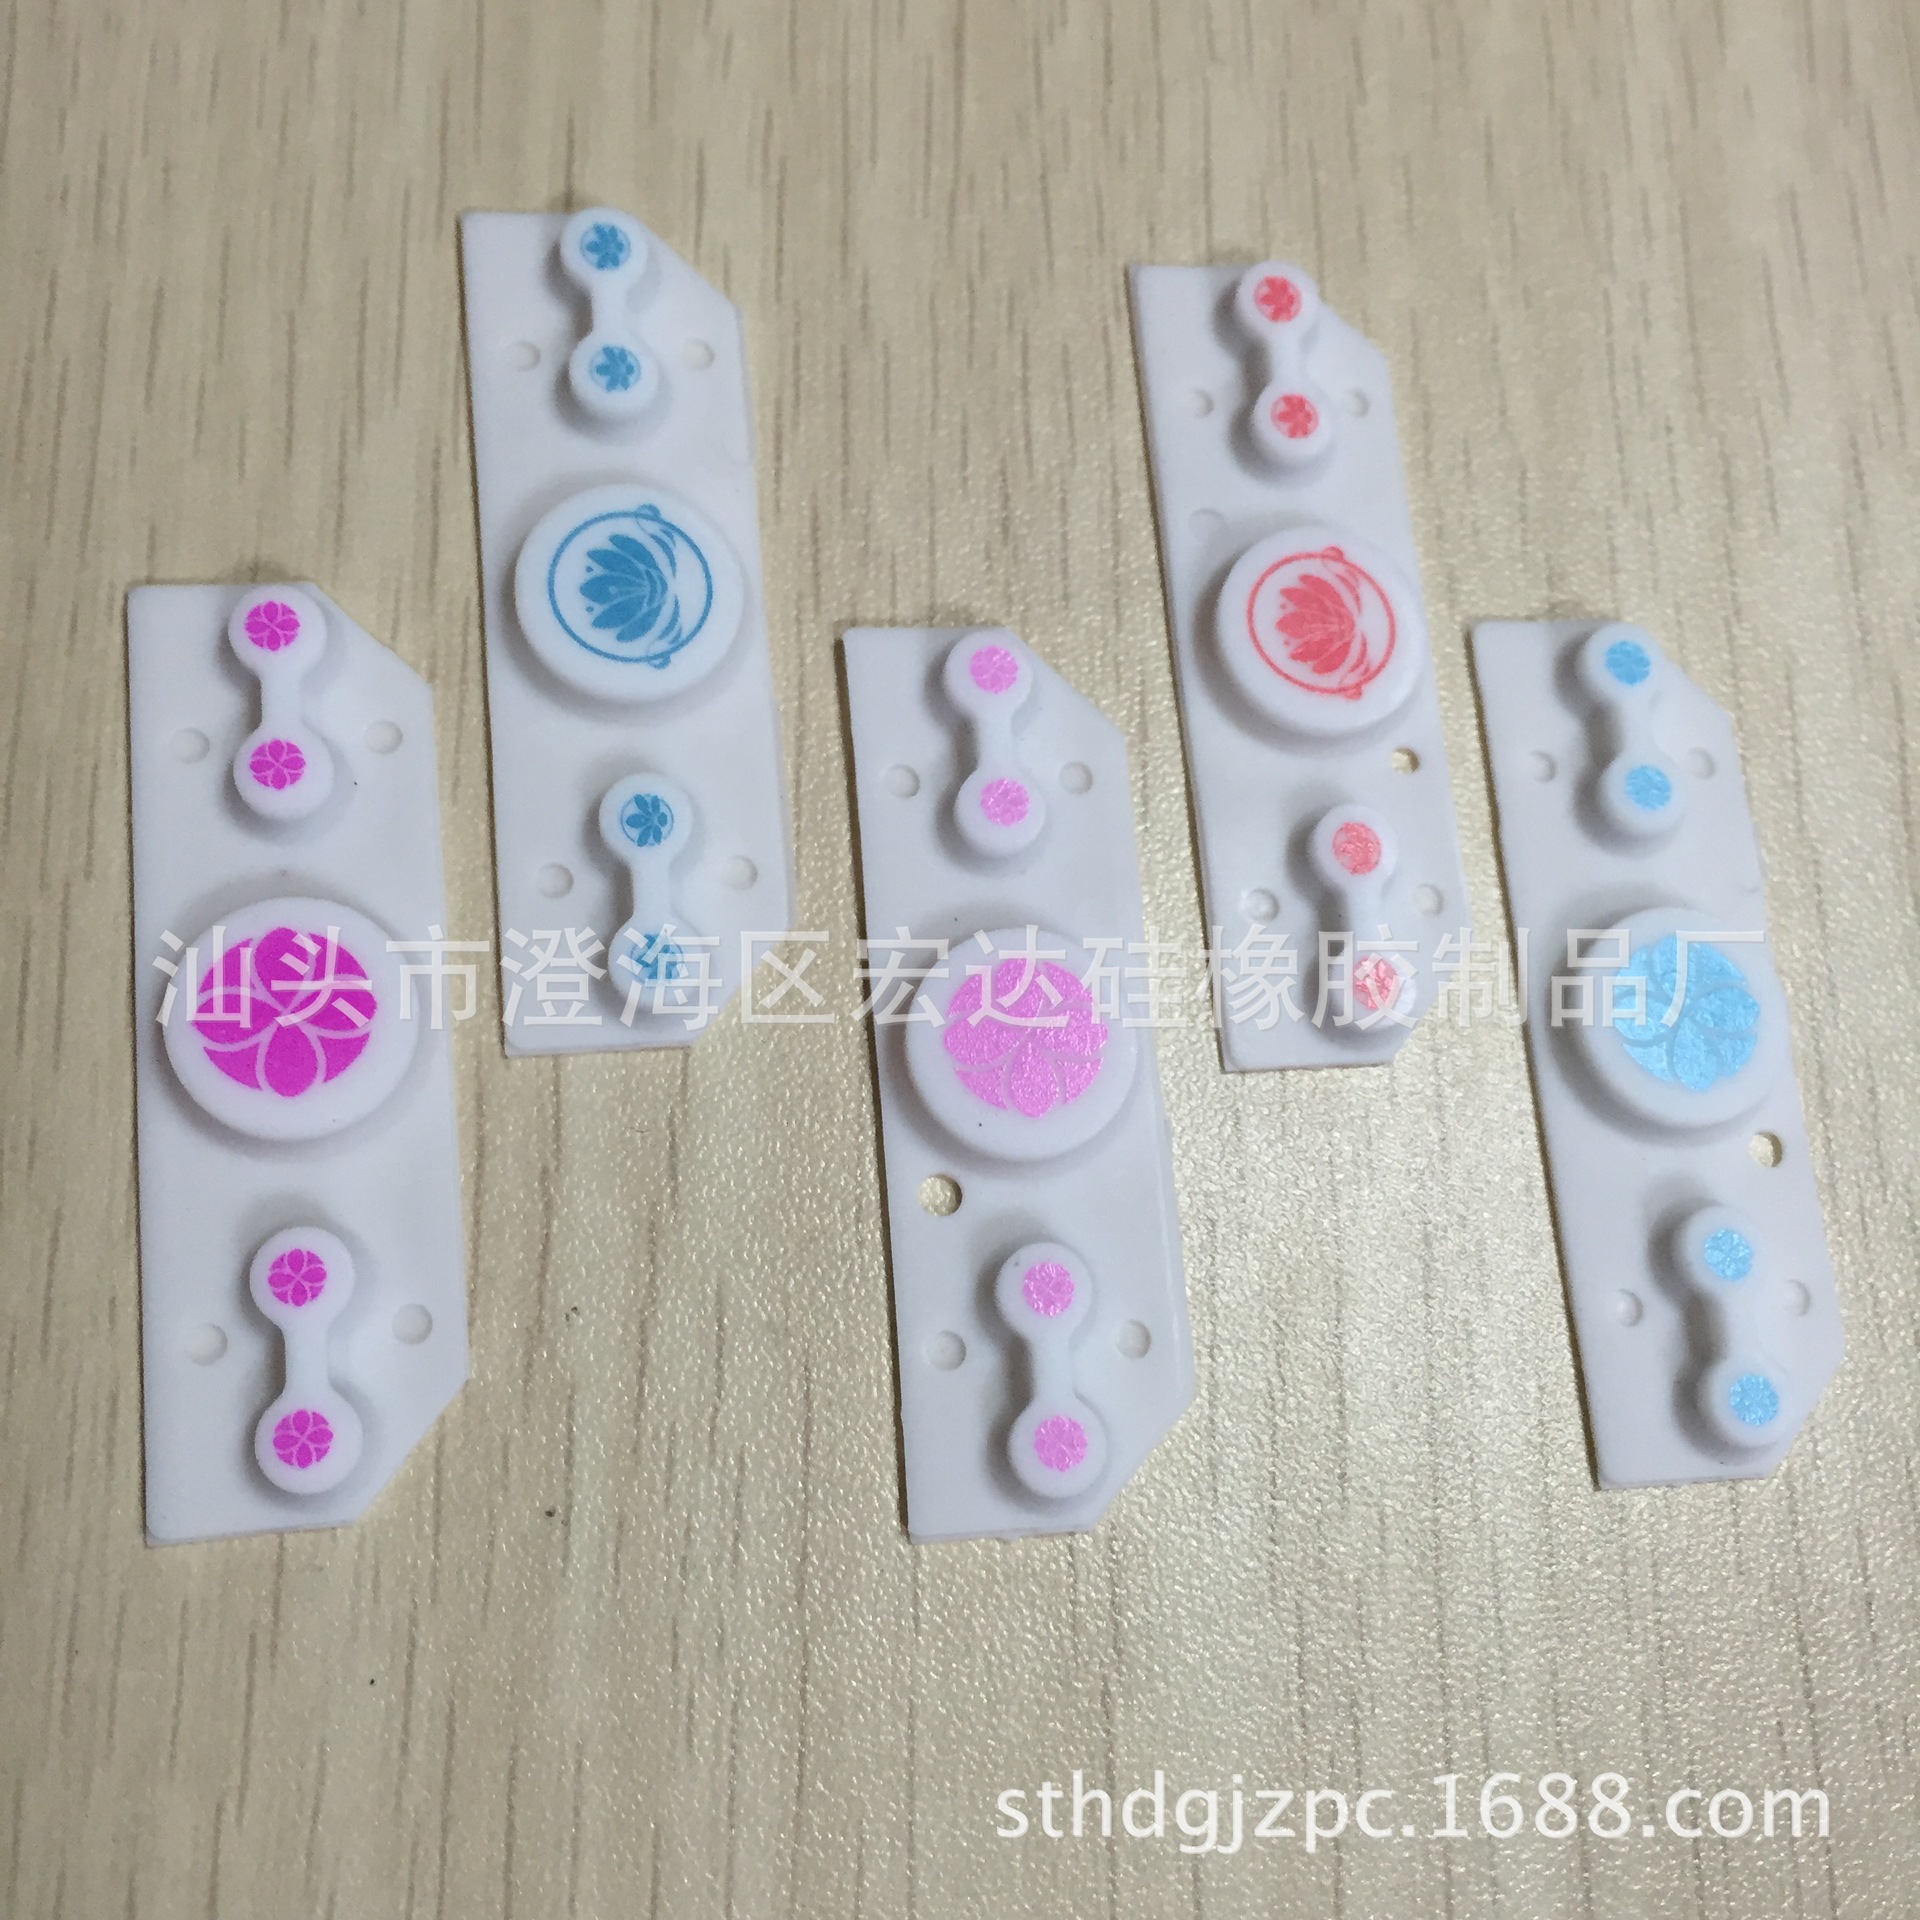 Production of Toy Mobile Phone Button Toy Electronic Conducting Resin Silicone Button Toy Barbie Mobile Phone Accessories